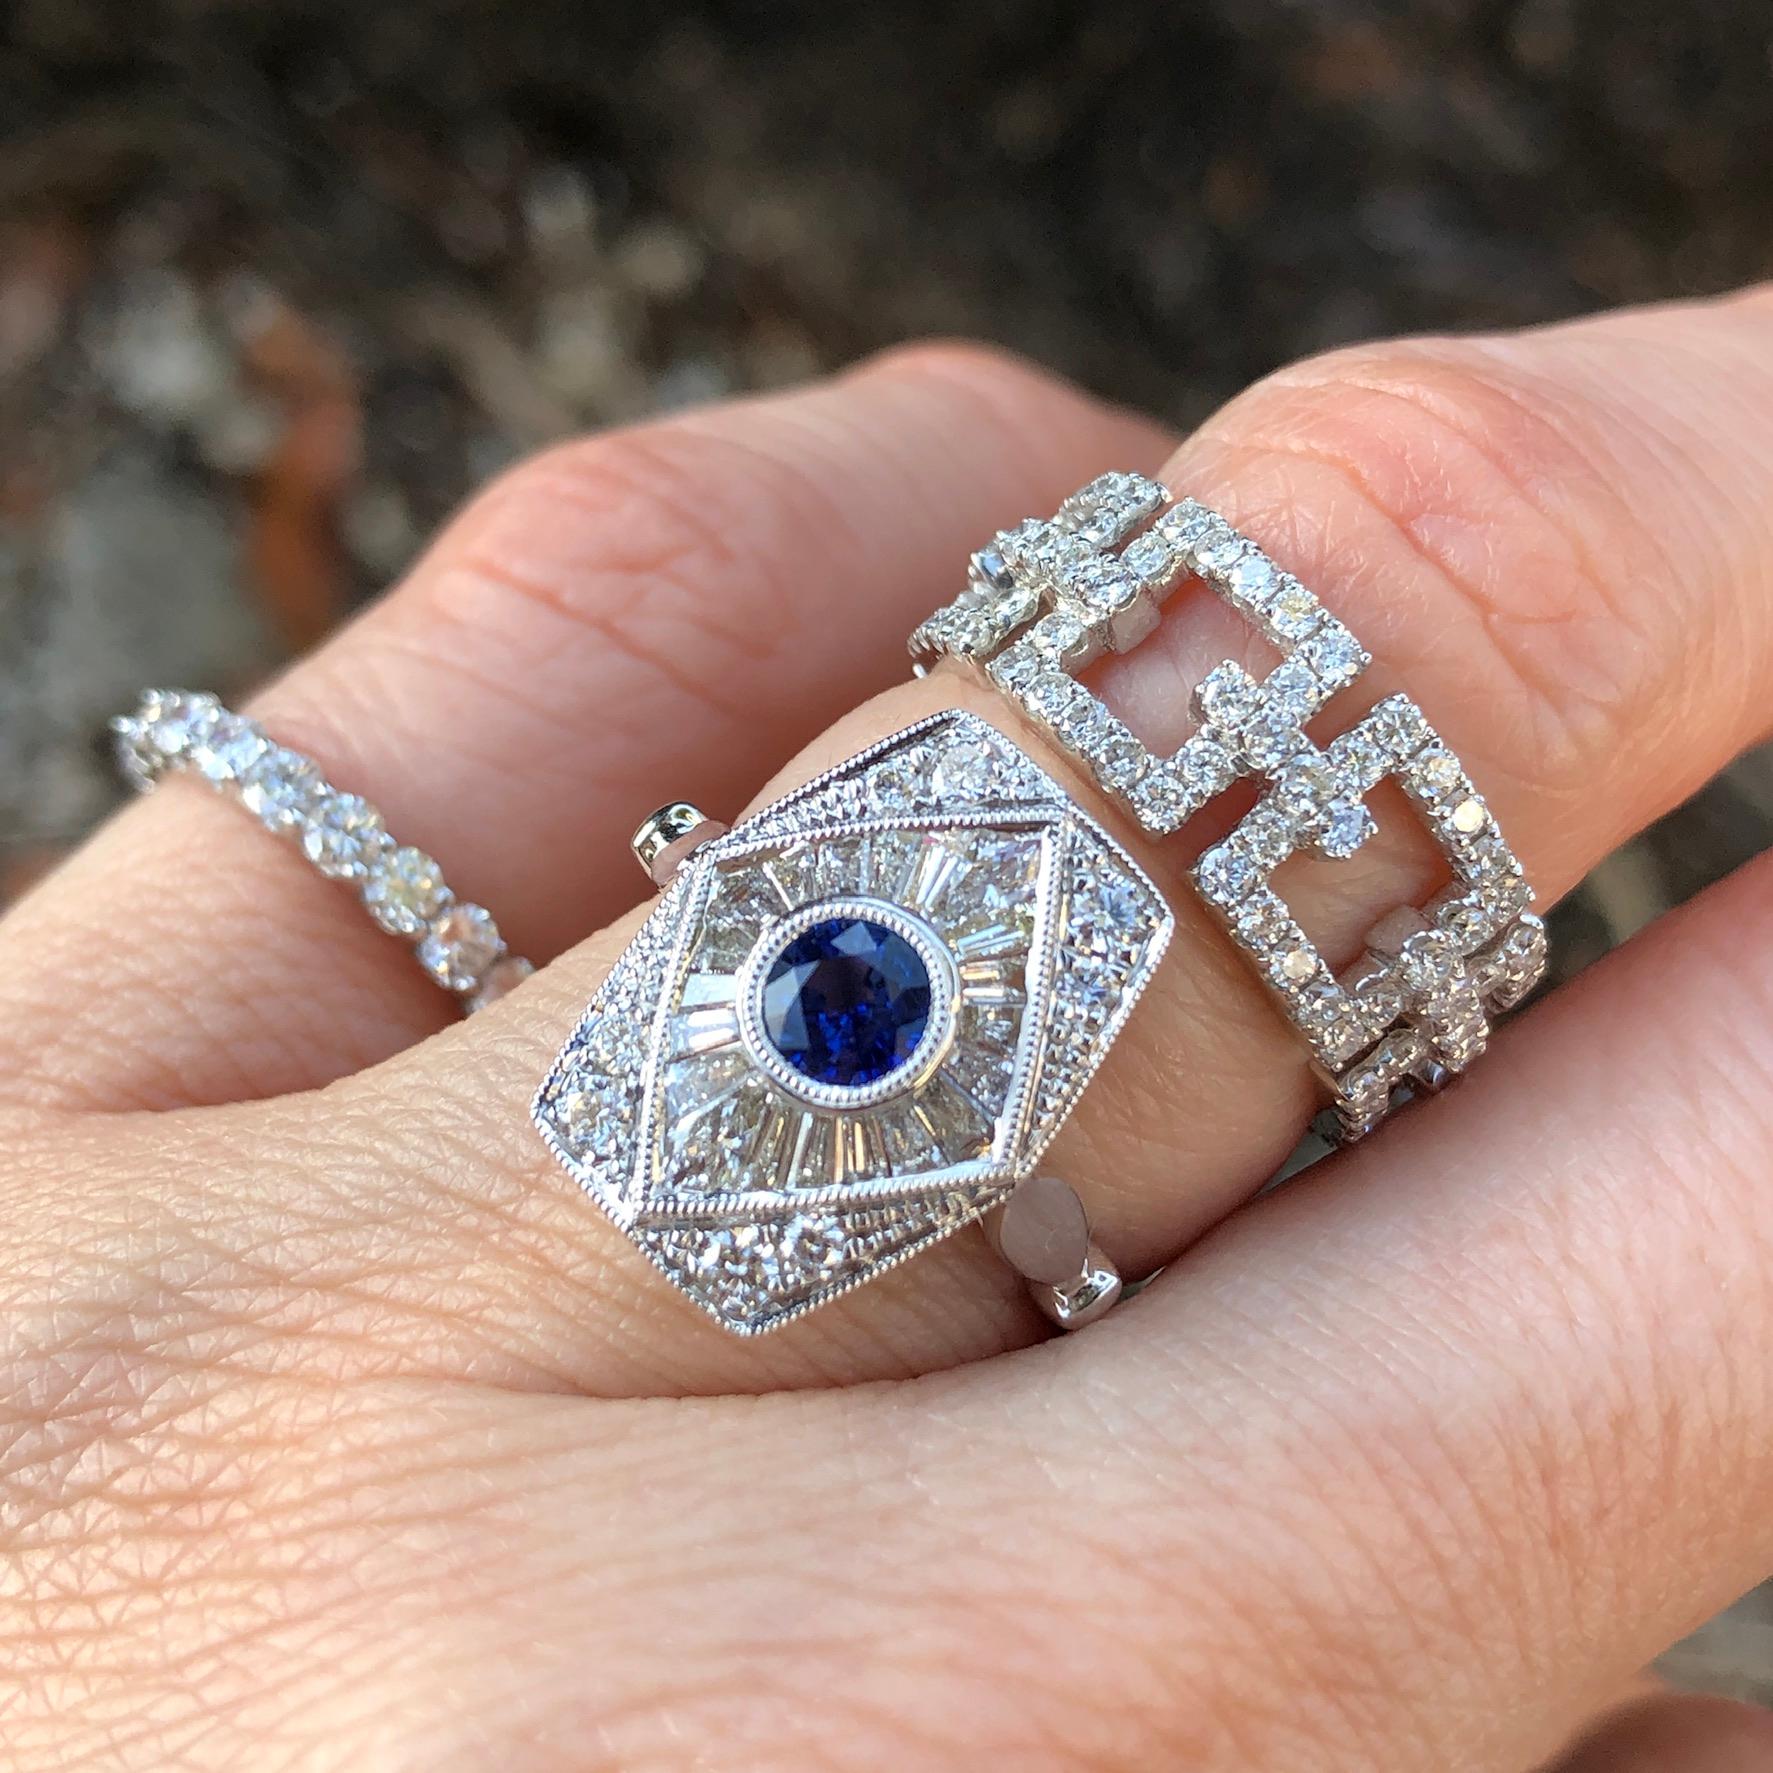 Sure to be a family heirloom! 

18K white gold ring with baguette diamond precisely cut to envelope the center sapphire. The total diamond in tapered baguettes is .48 carat total weight and features an additional .38 carats in pave diamonds at the